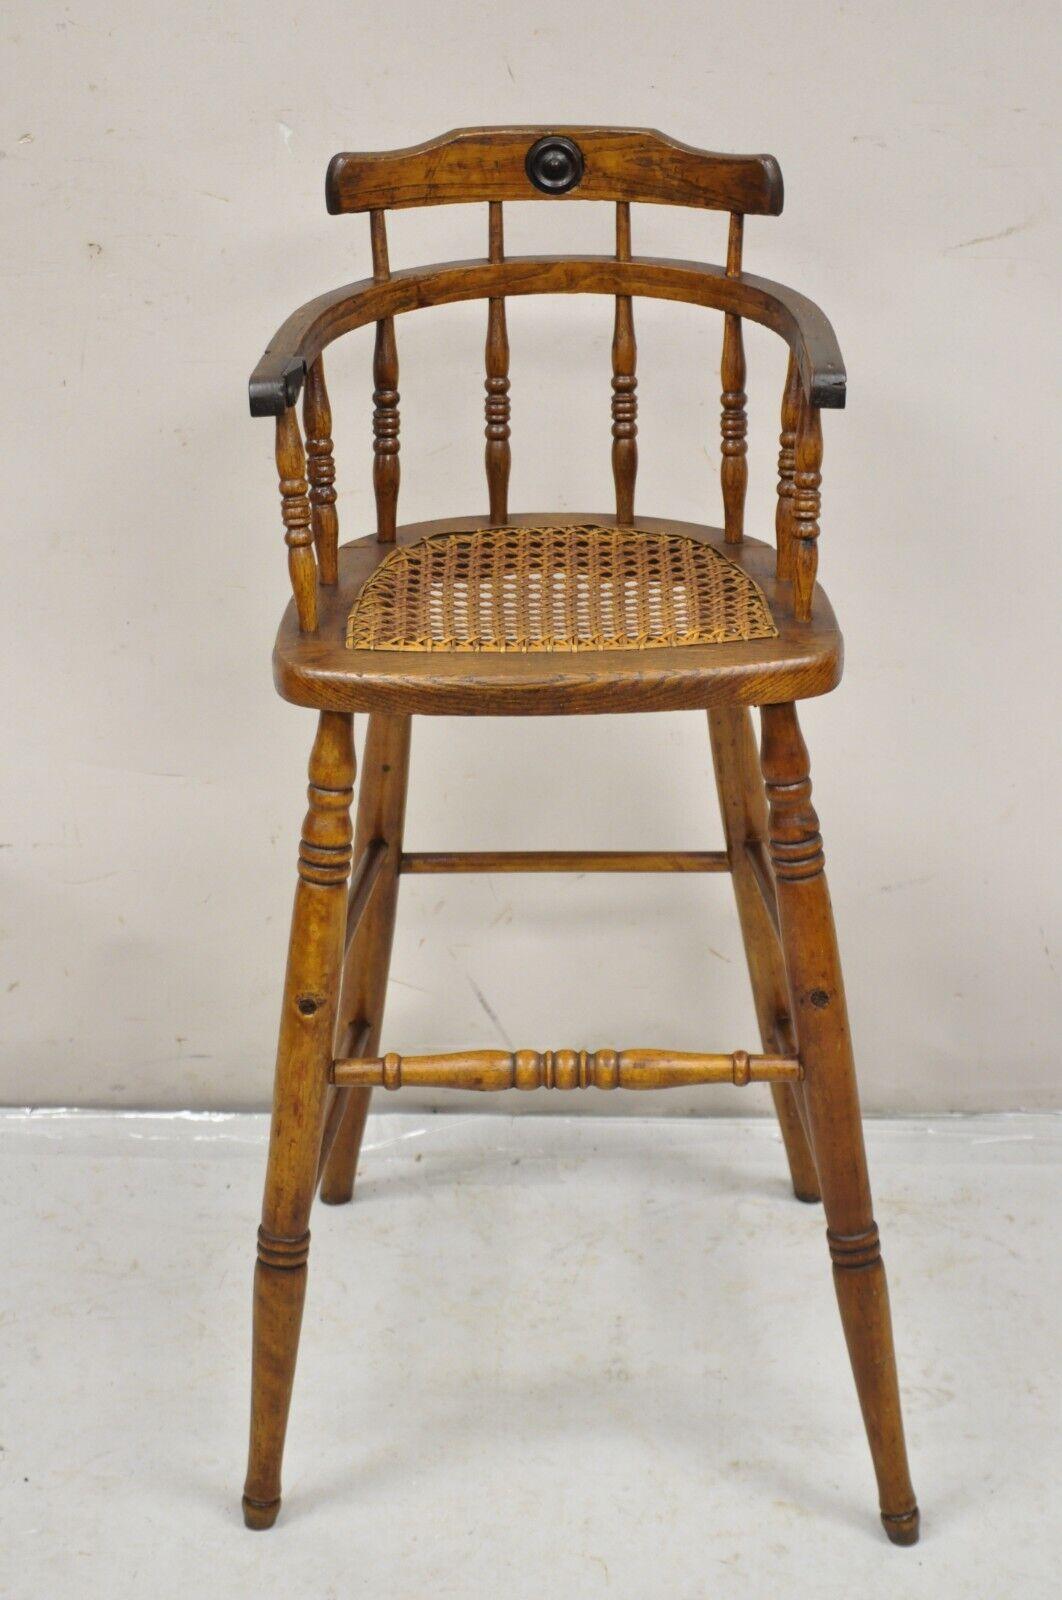 Antique Victorian Small Child's Oak Wood Spindle Cane Seat High Chair. Circa 19th Century. Measurements: 33